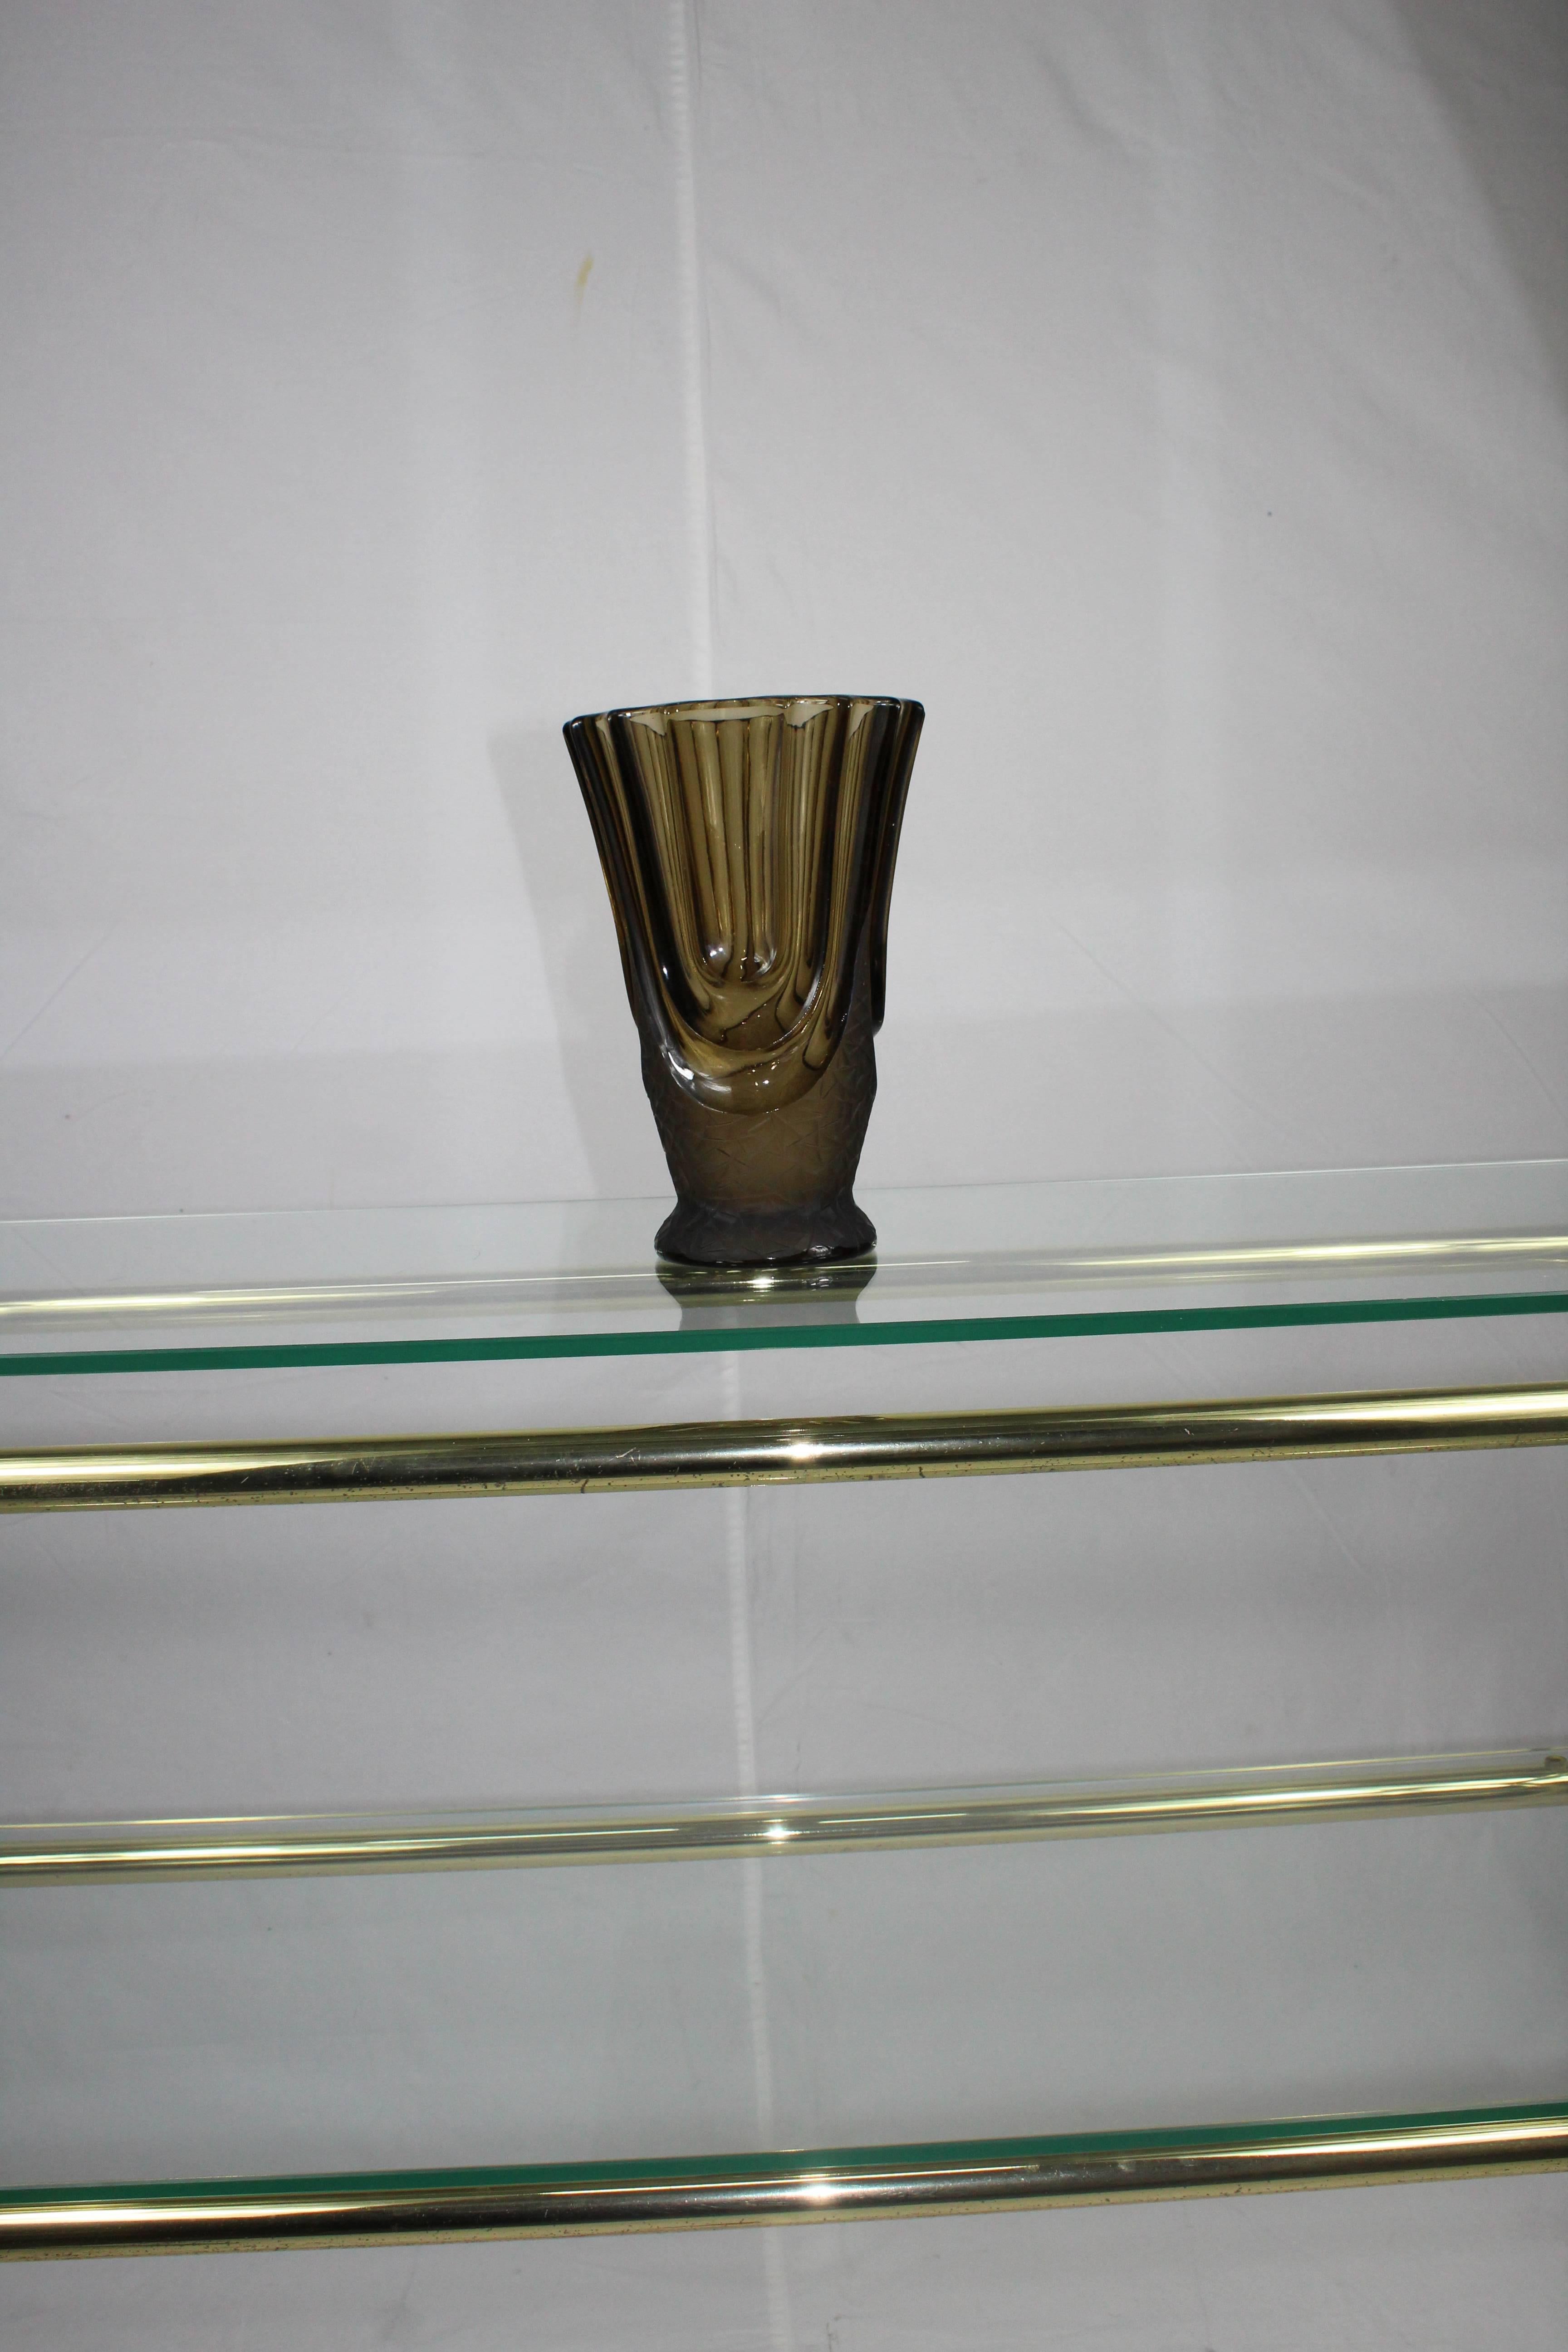 Art Deco vase made of smoked glass. Made in Italy, circa 1930.